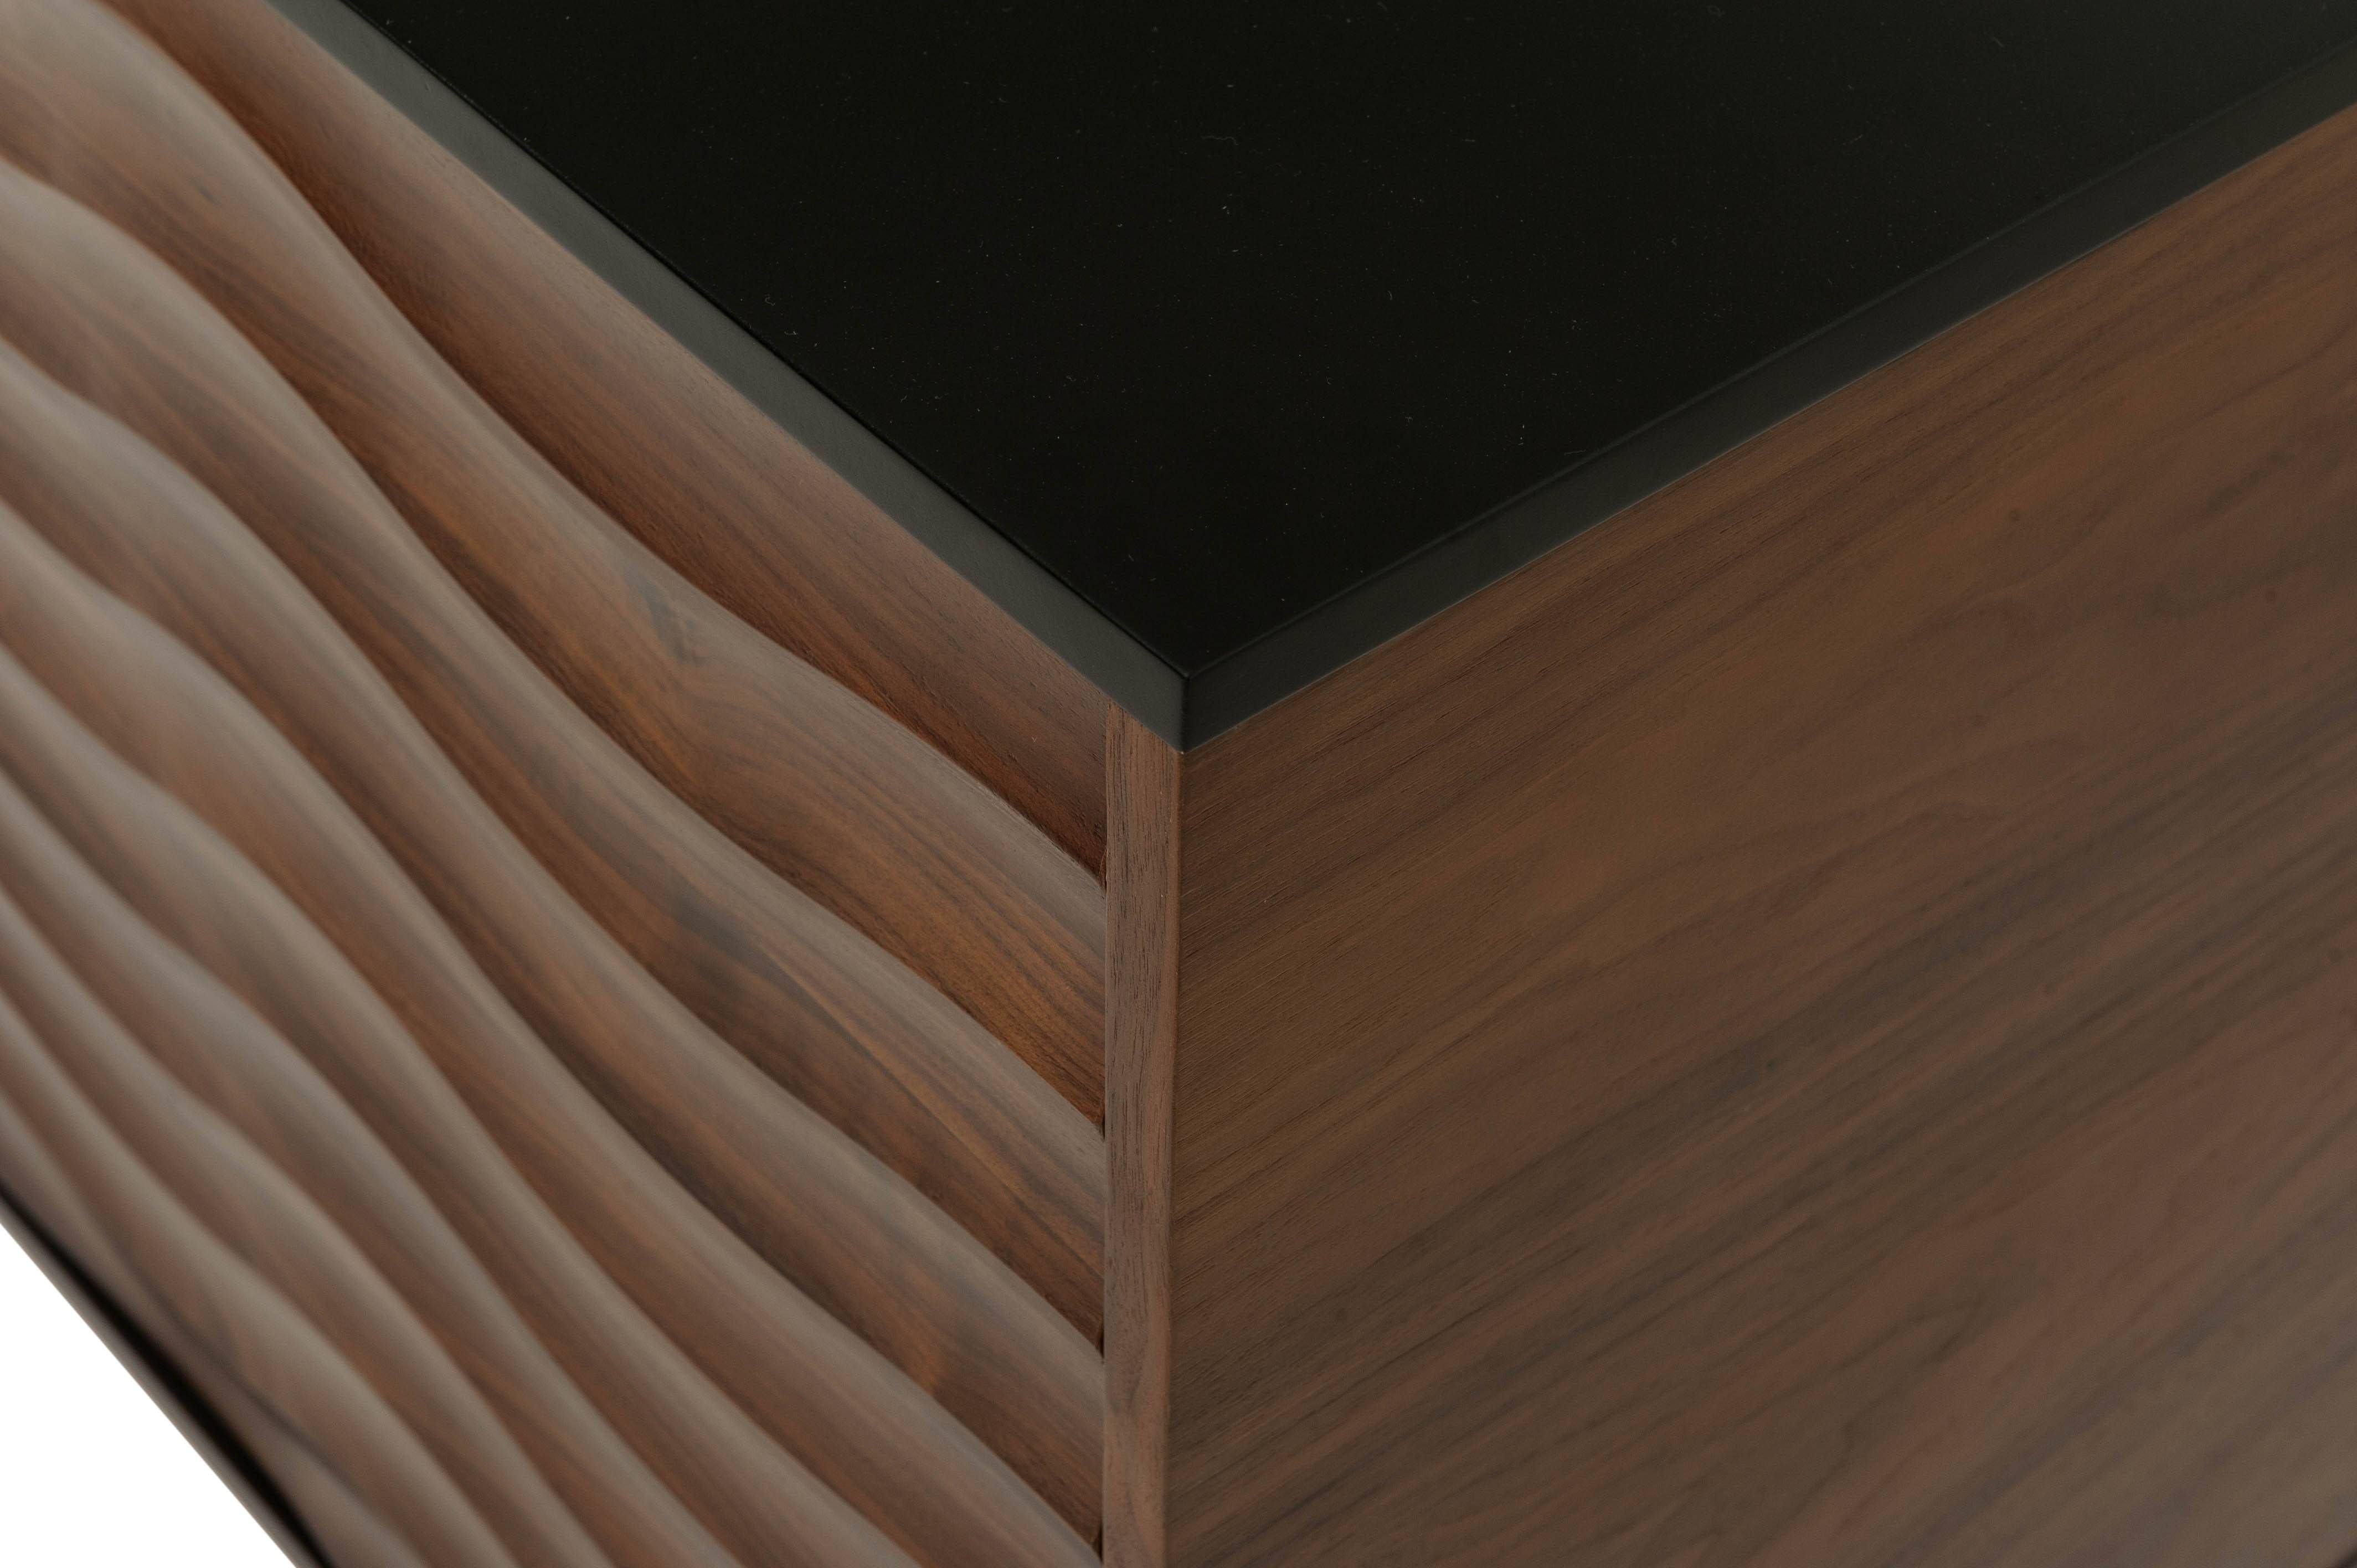 Swell Sideboard Cabinet In Walnut And Blacknuevo | Hgpm103 Throughout Walnut And Black Sideboards (View 27 of 30)